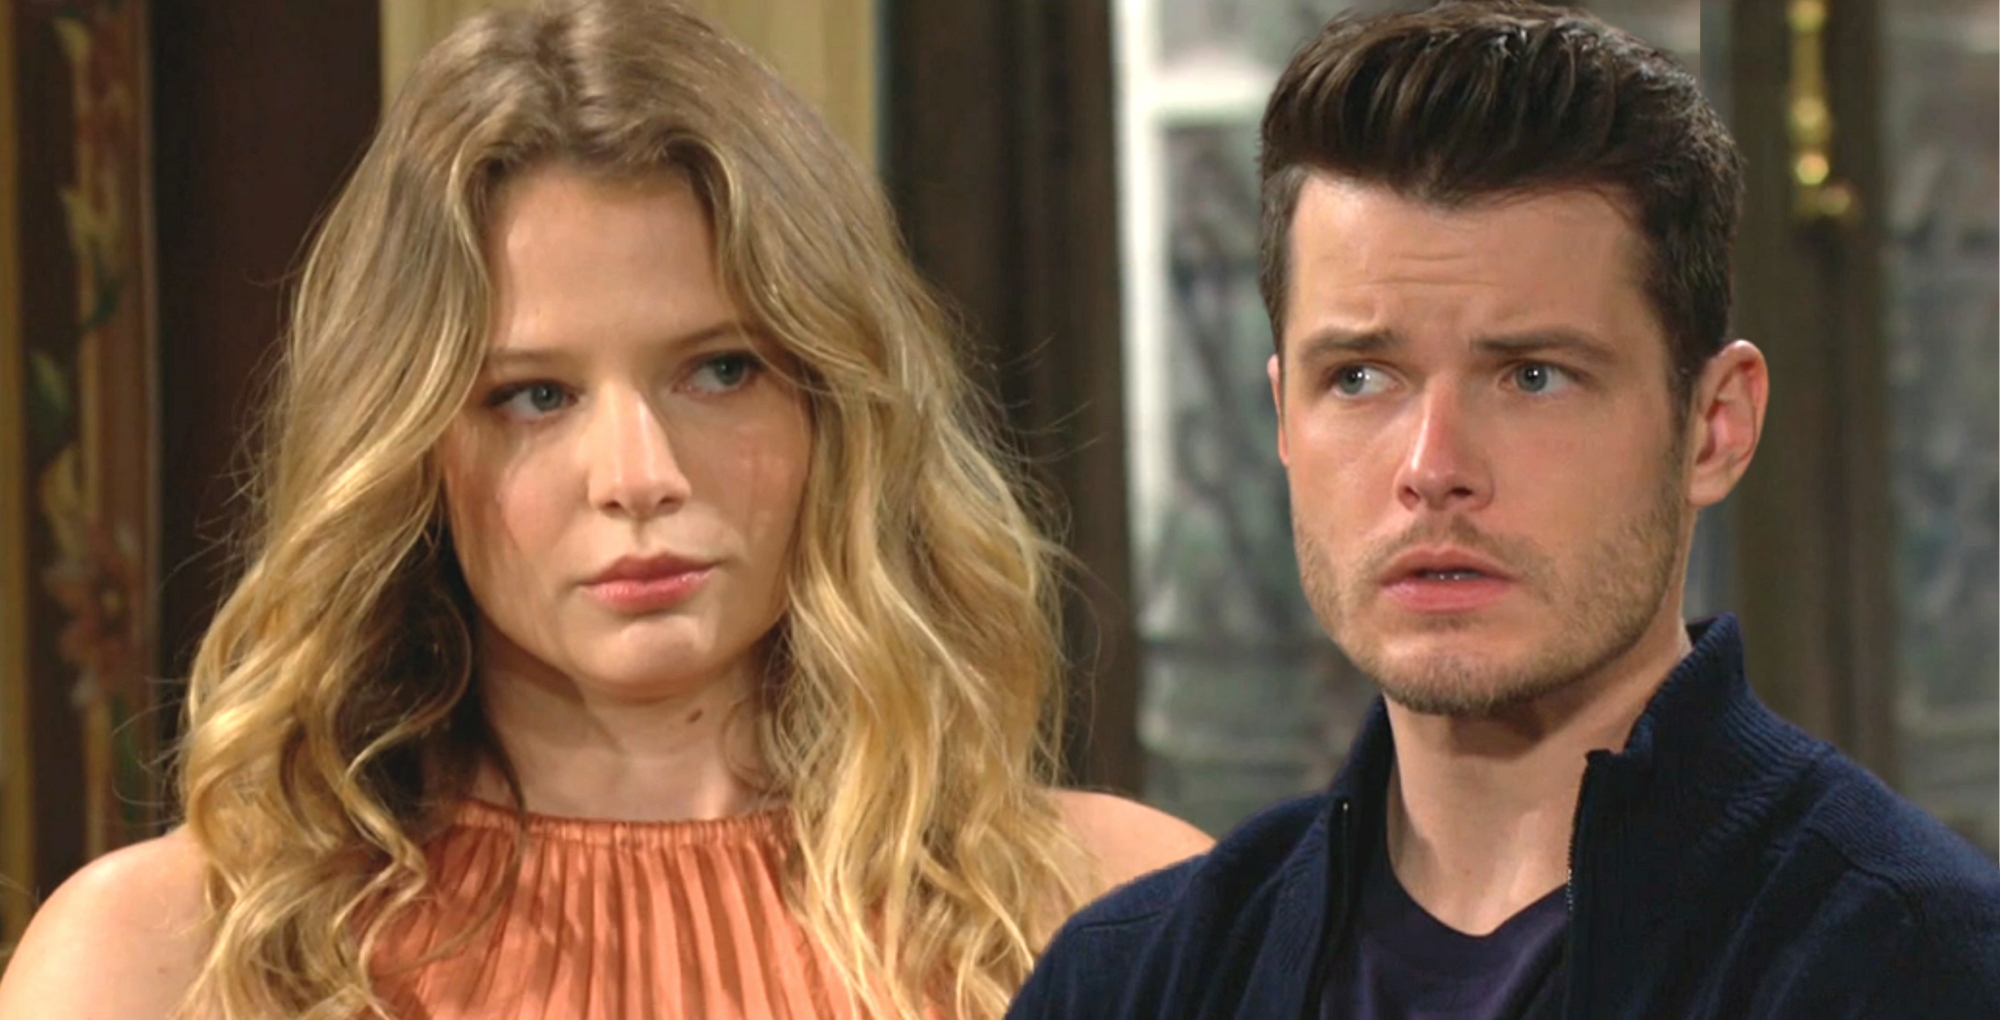 will summer newman abbott be forgiven by kyle abbott on young and the restless.